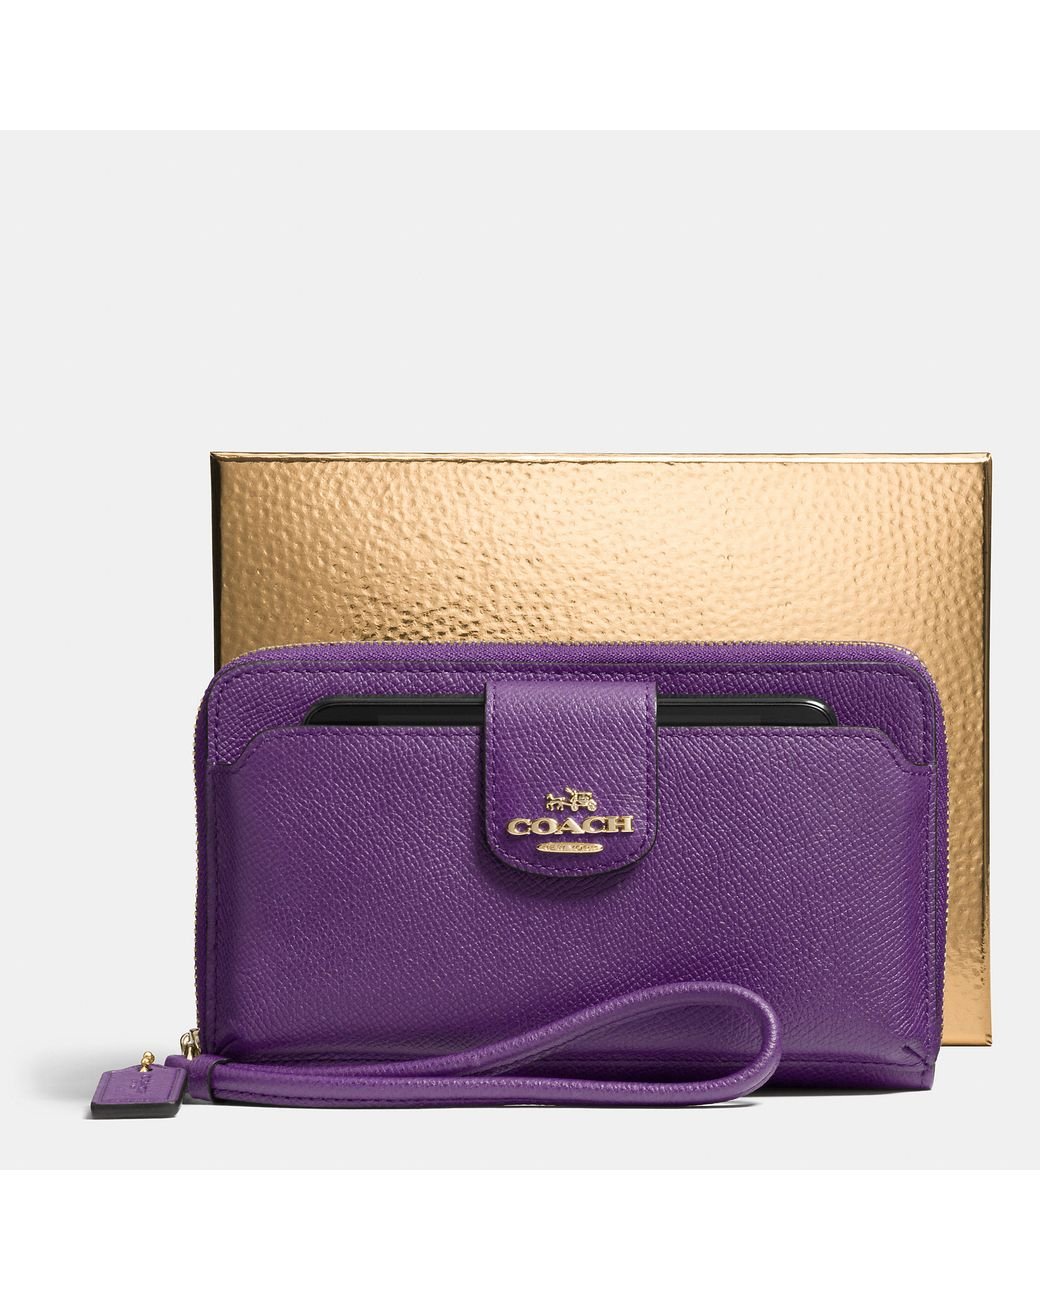 COACH Pocket Universal Phone Wallet In Leather in Purple | Lyst